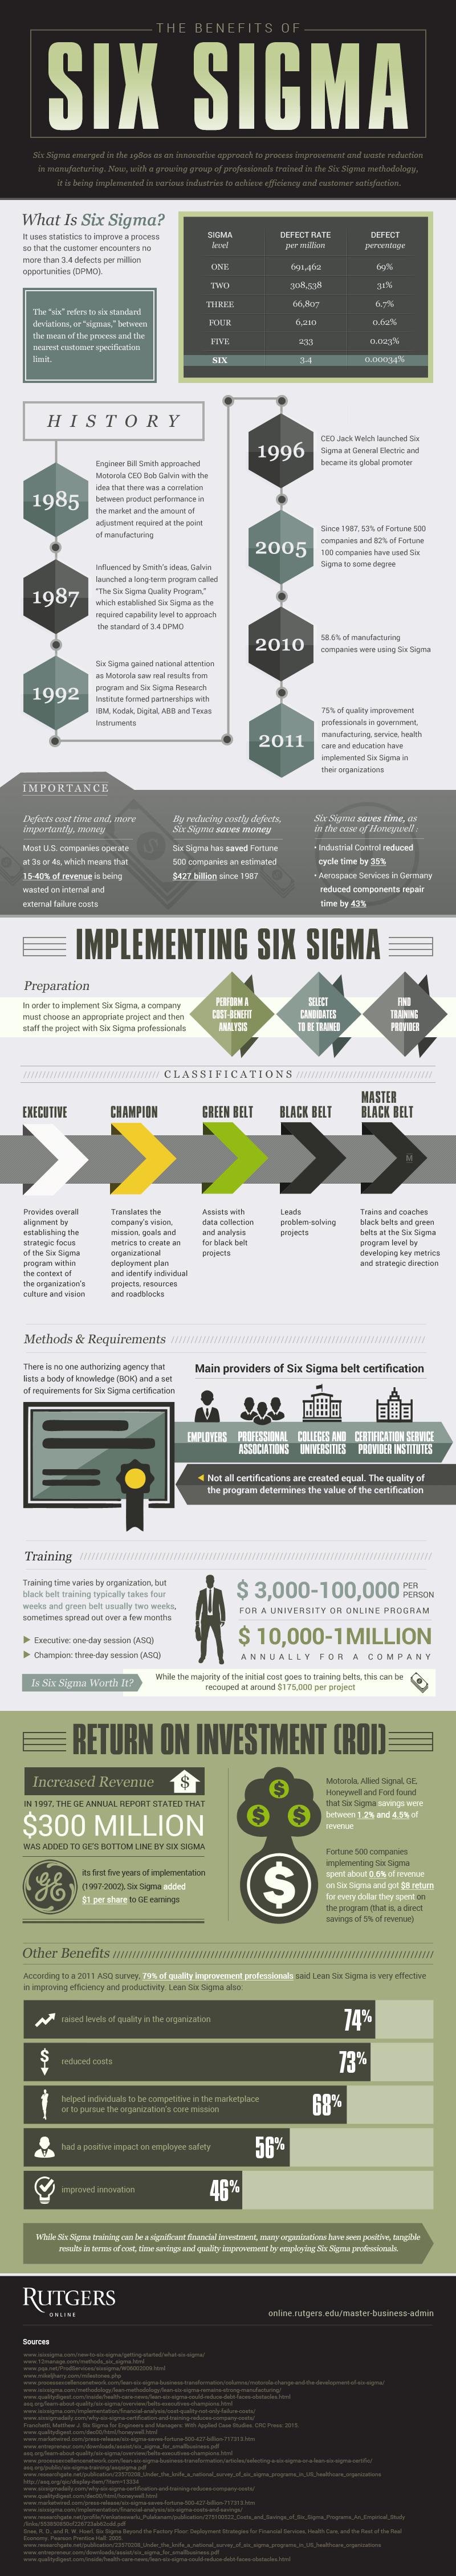 The benefits of six sigma infographic